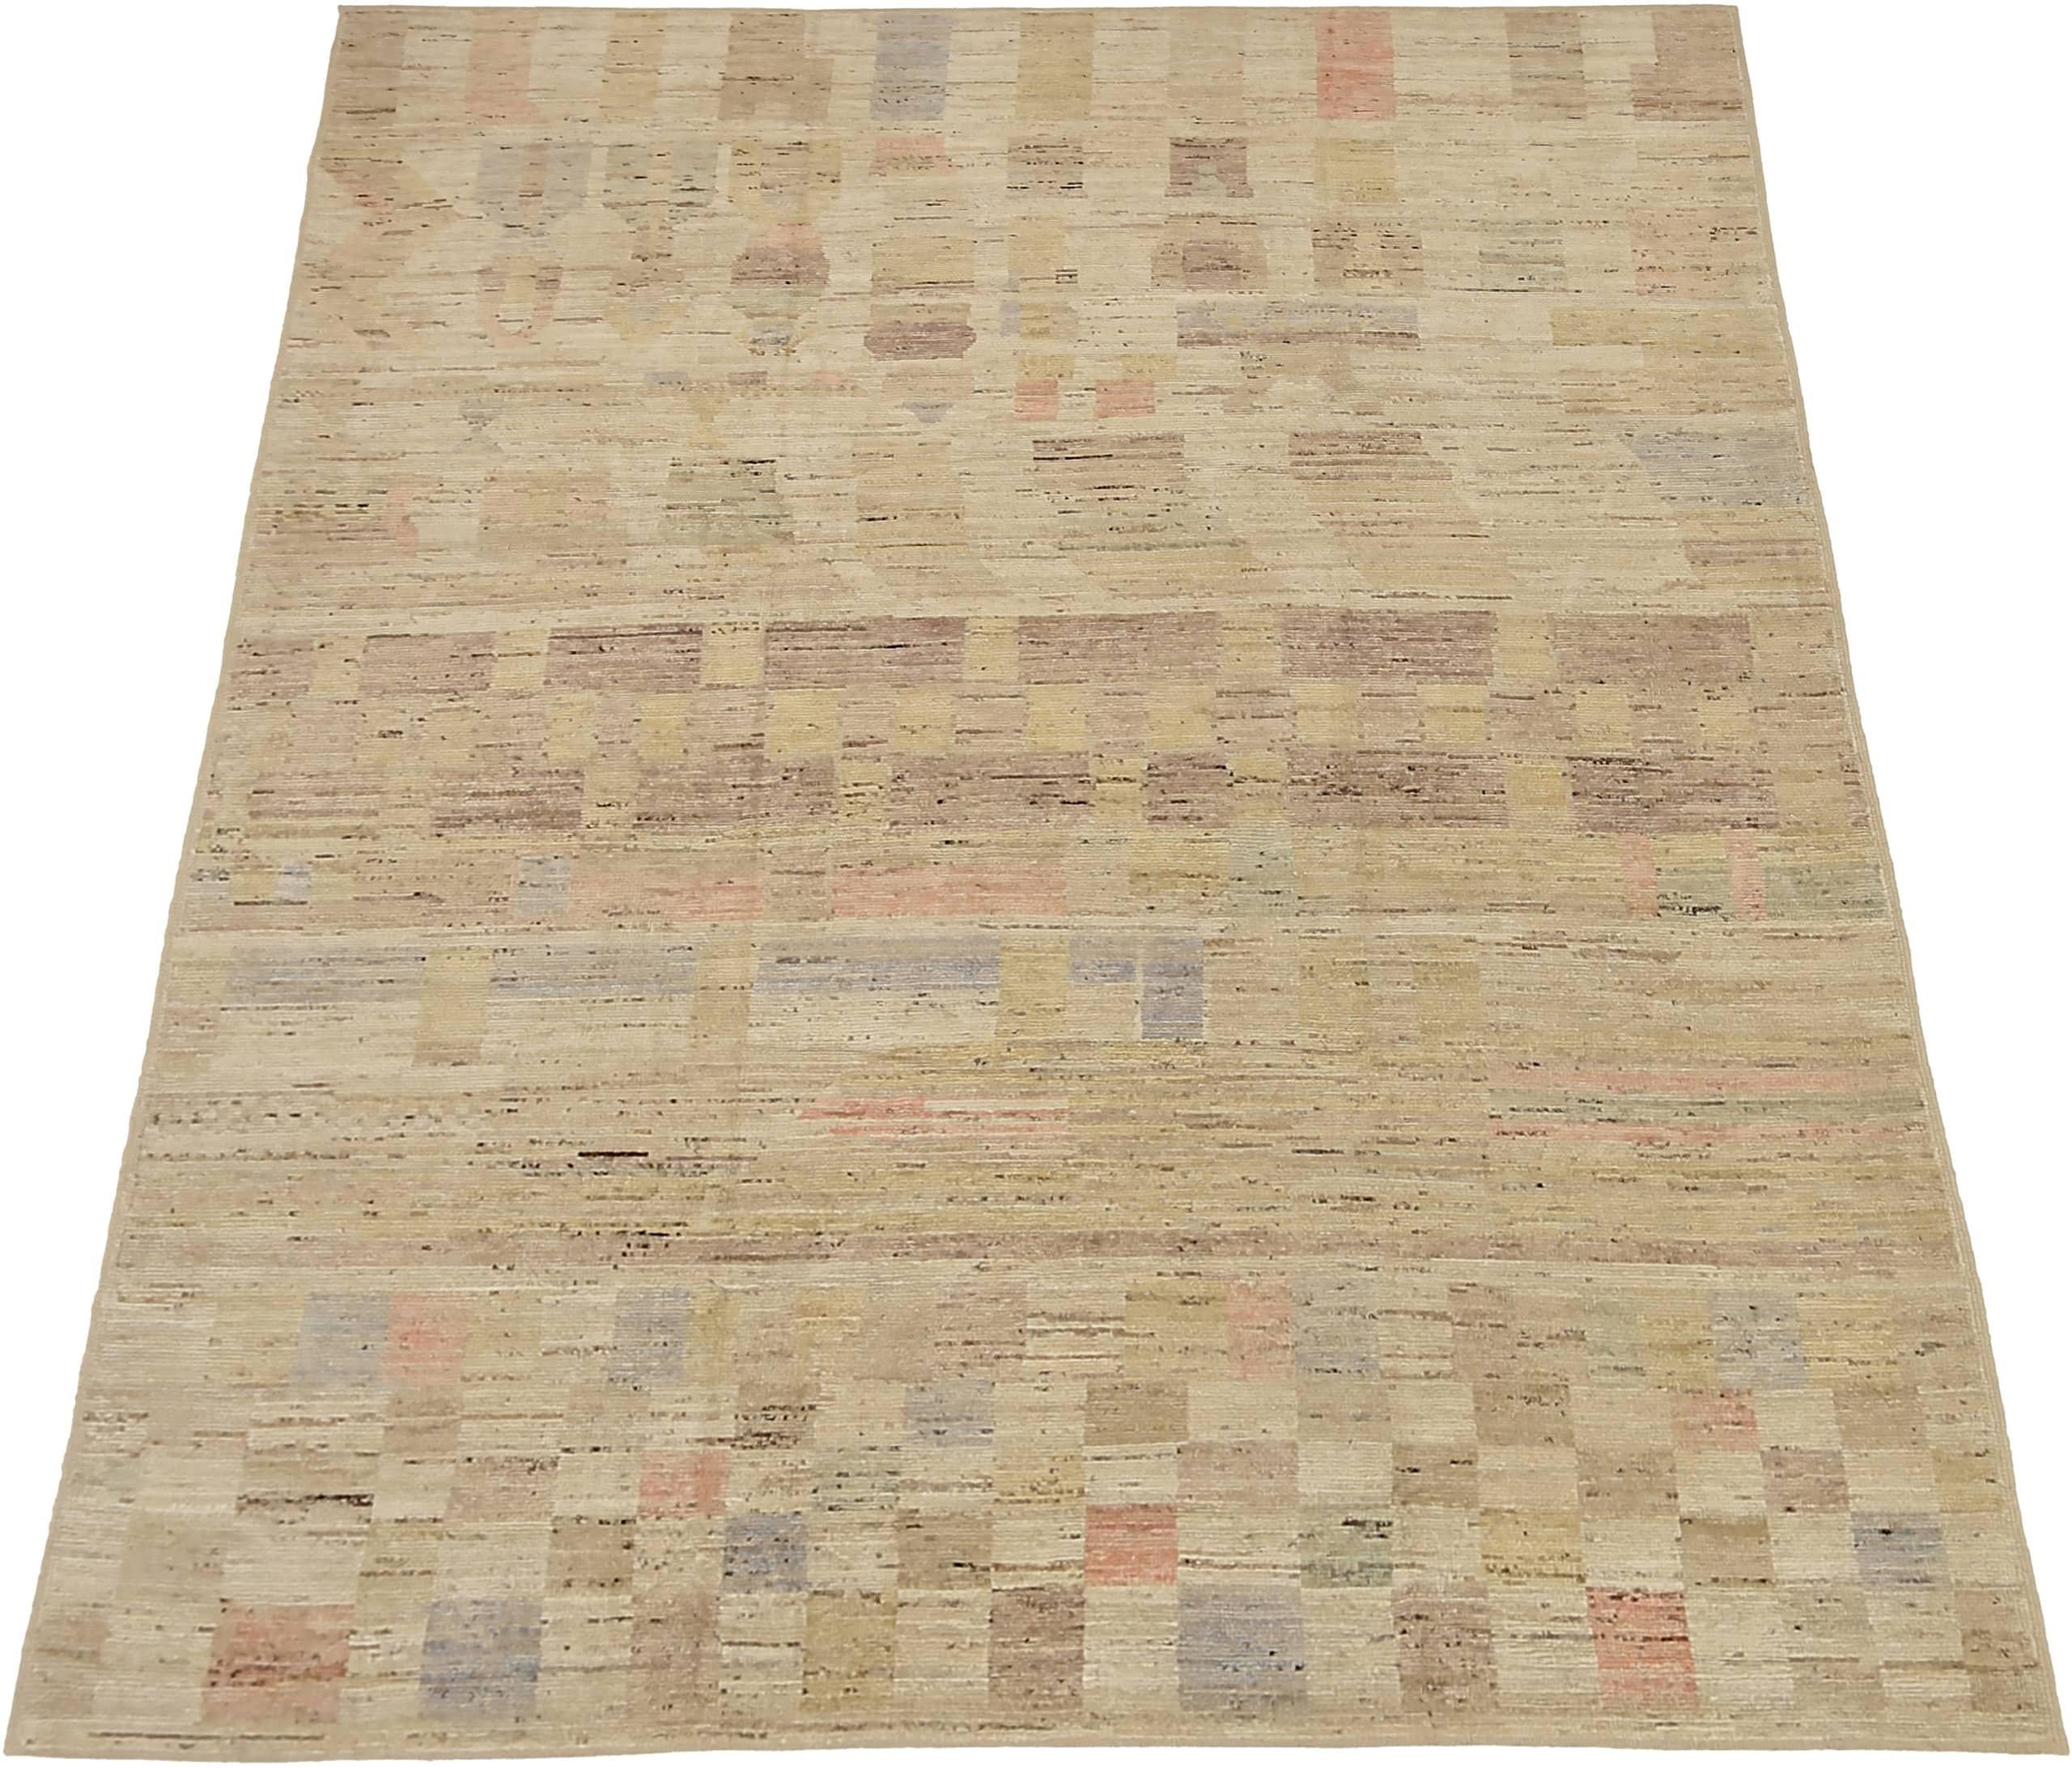 Contemporary Nazmiyal Collection Geometric Modern Distressed Rug. 9 ft 3 in x 11 ft 9 in 